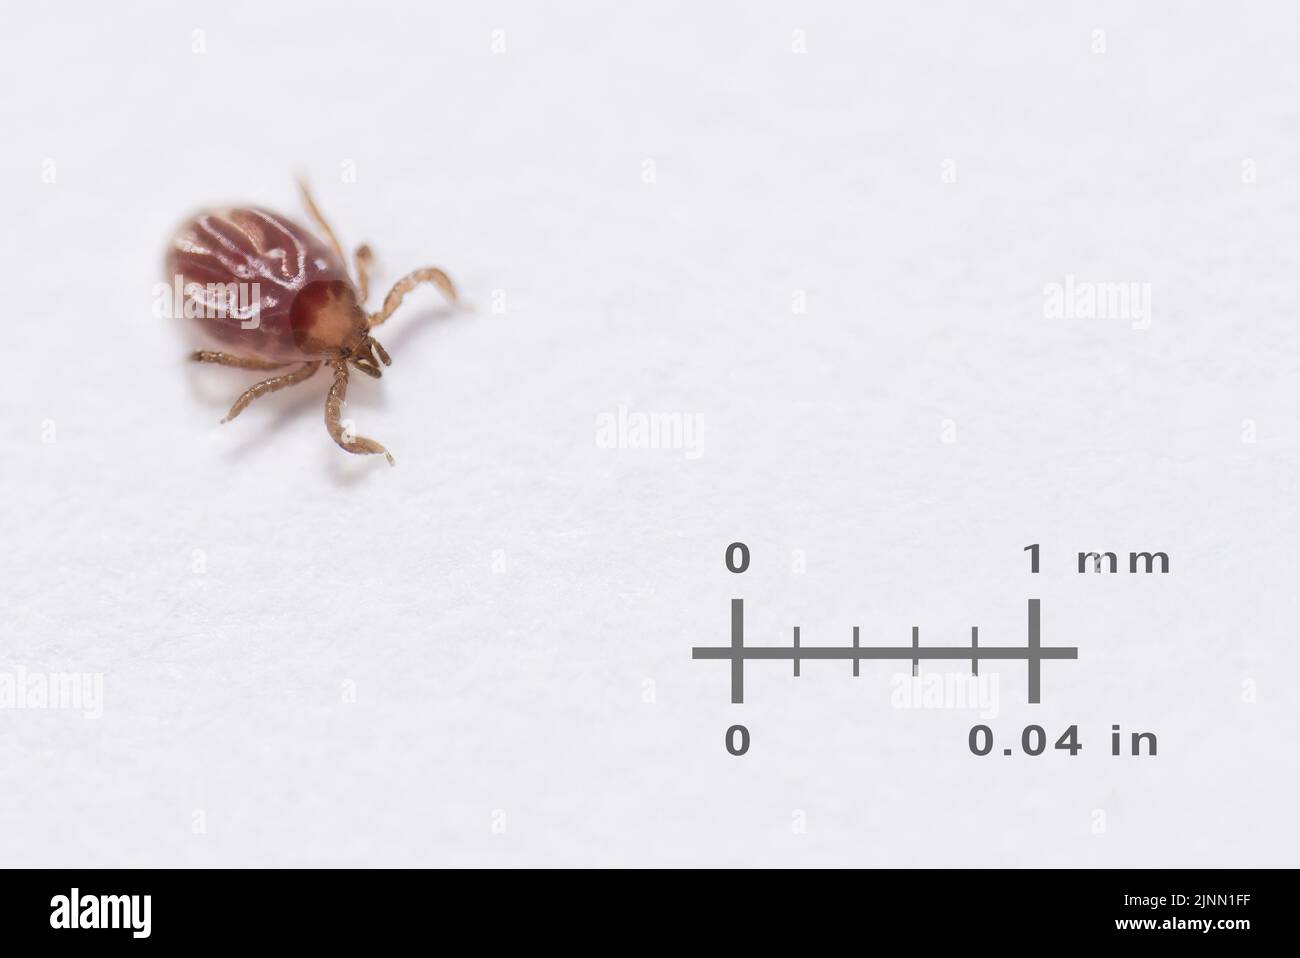 Small deer tick with measuring scale on white background. Ixodes ricinus or scapularis. Larva lifecycle stage of parasitic insect. Tick-borne diseases. Stock Photo